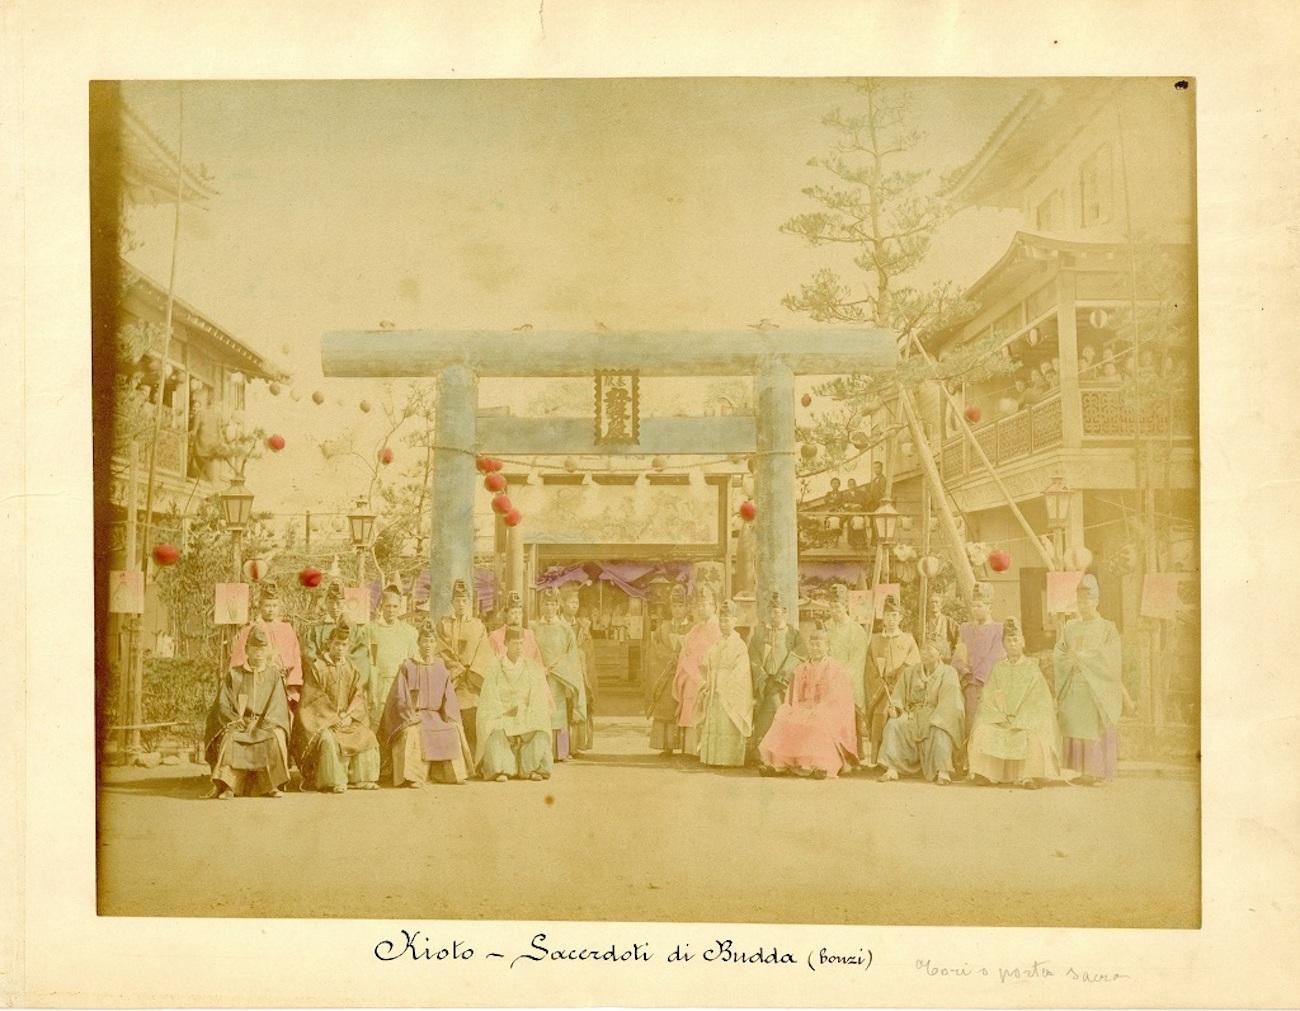 Unknown Black and White Photograph - Priests in Kyoto - Hand-Colored Albumen Print 1870/1890